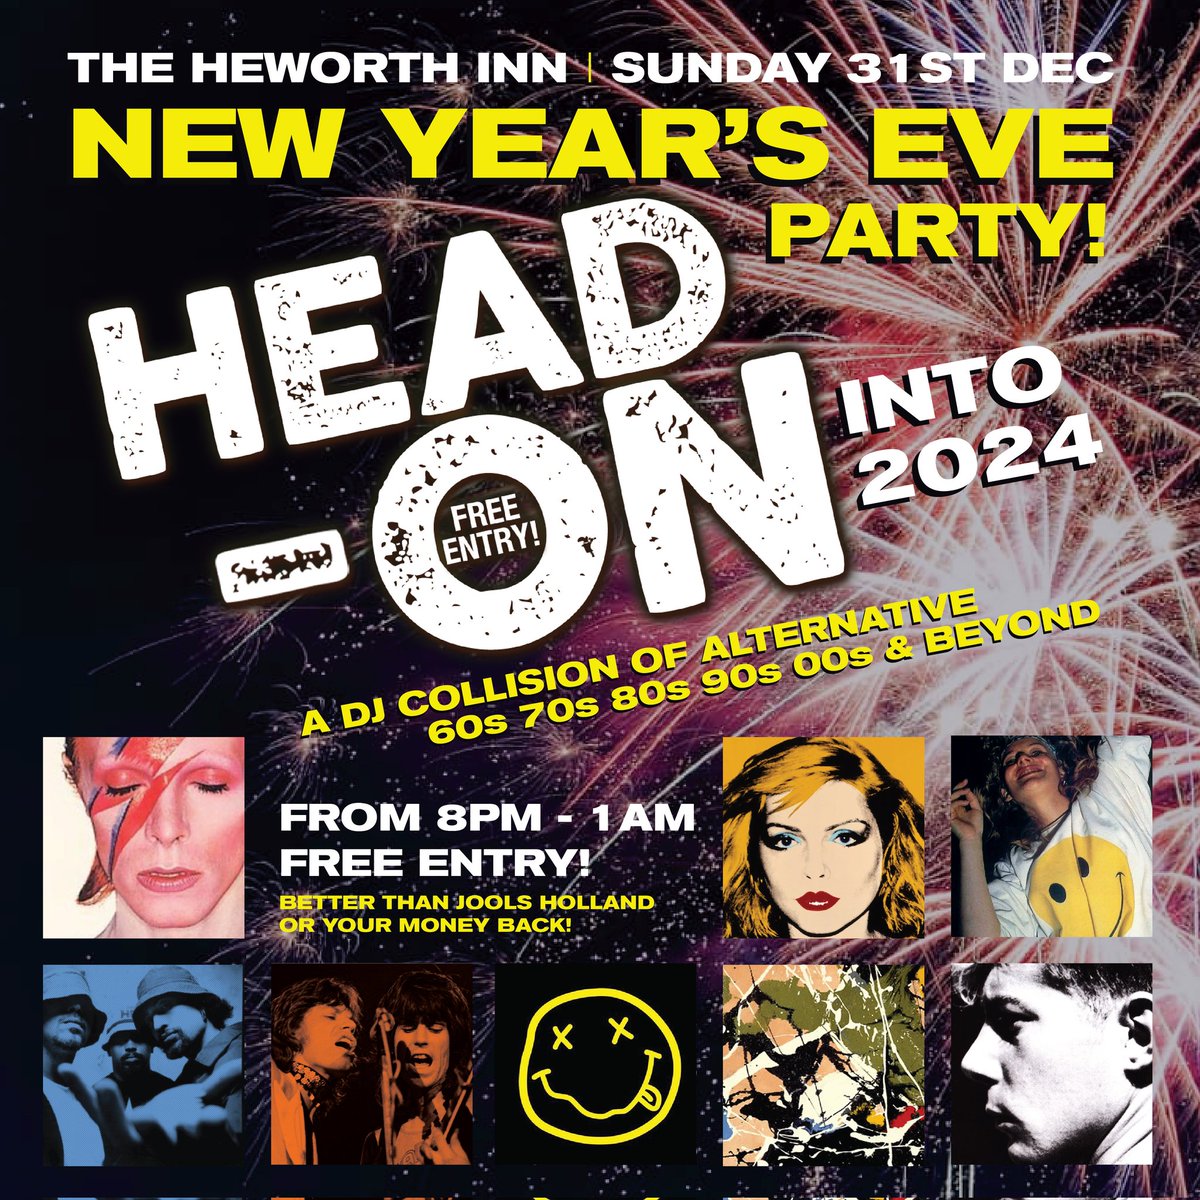 NEW YEARS EVE PARTY - SUNDAY 31st DECEMBER HEAD-ON at The Heworth Inn, York DJ Dave Atkinson & Phil Qua bringing in the new year with a mix of Alternative 60s,70s,80s,90s,00s & Beyond . . . The Heworth Inn - 64 Heworth Grn, Heworth, York YO31 7TQ